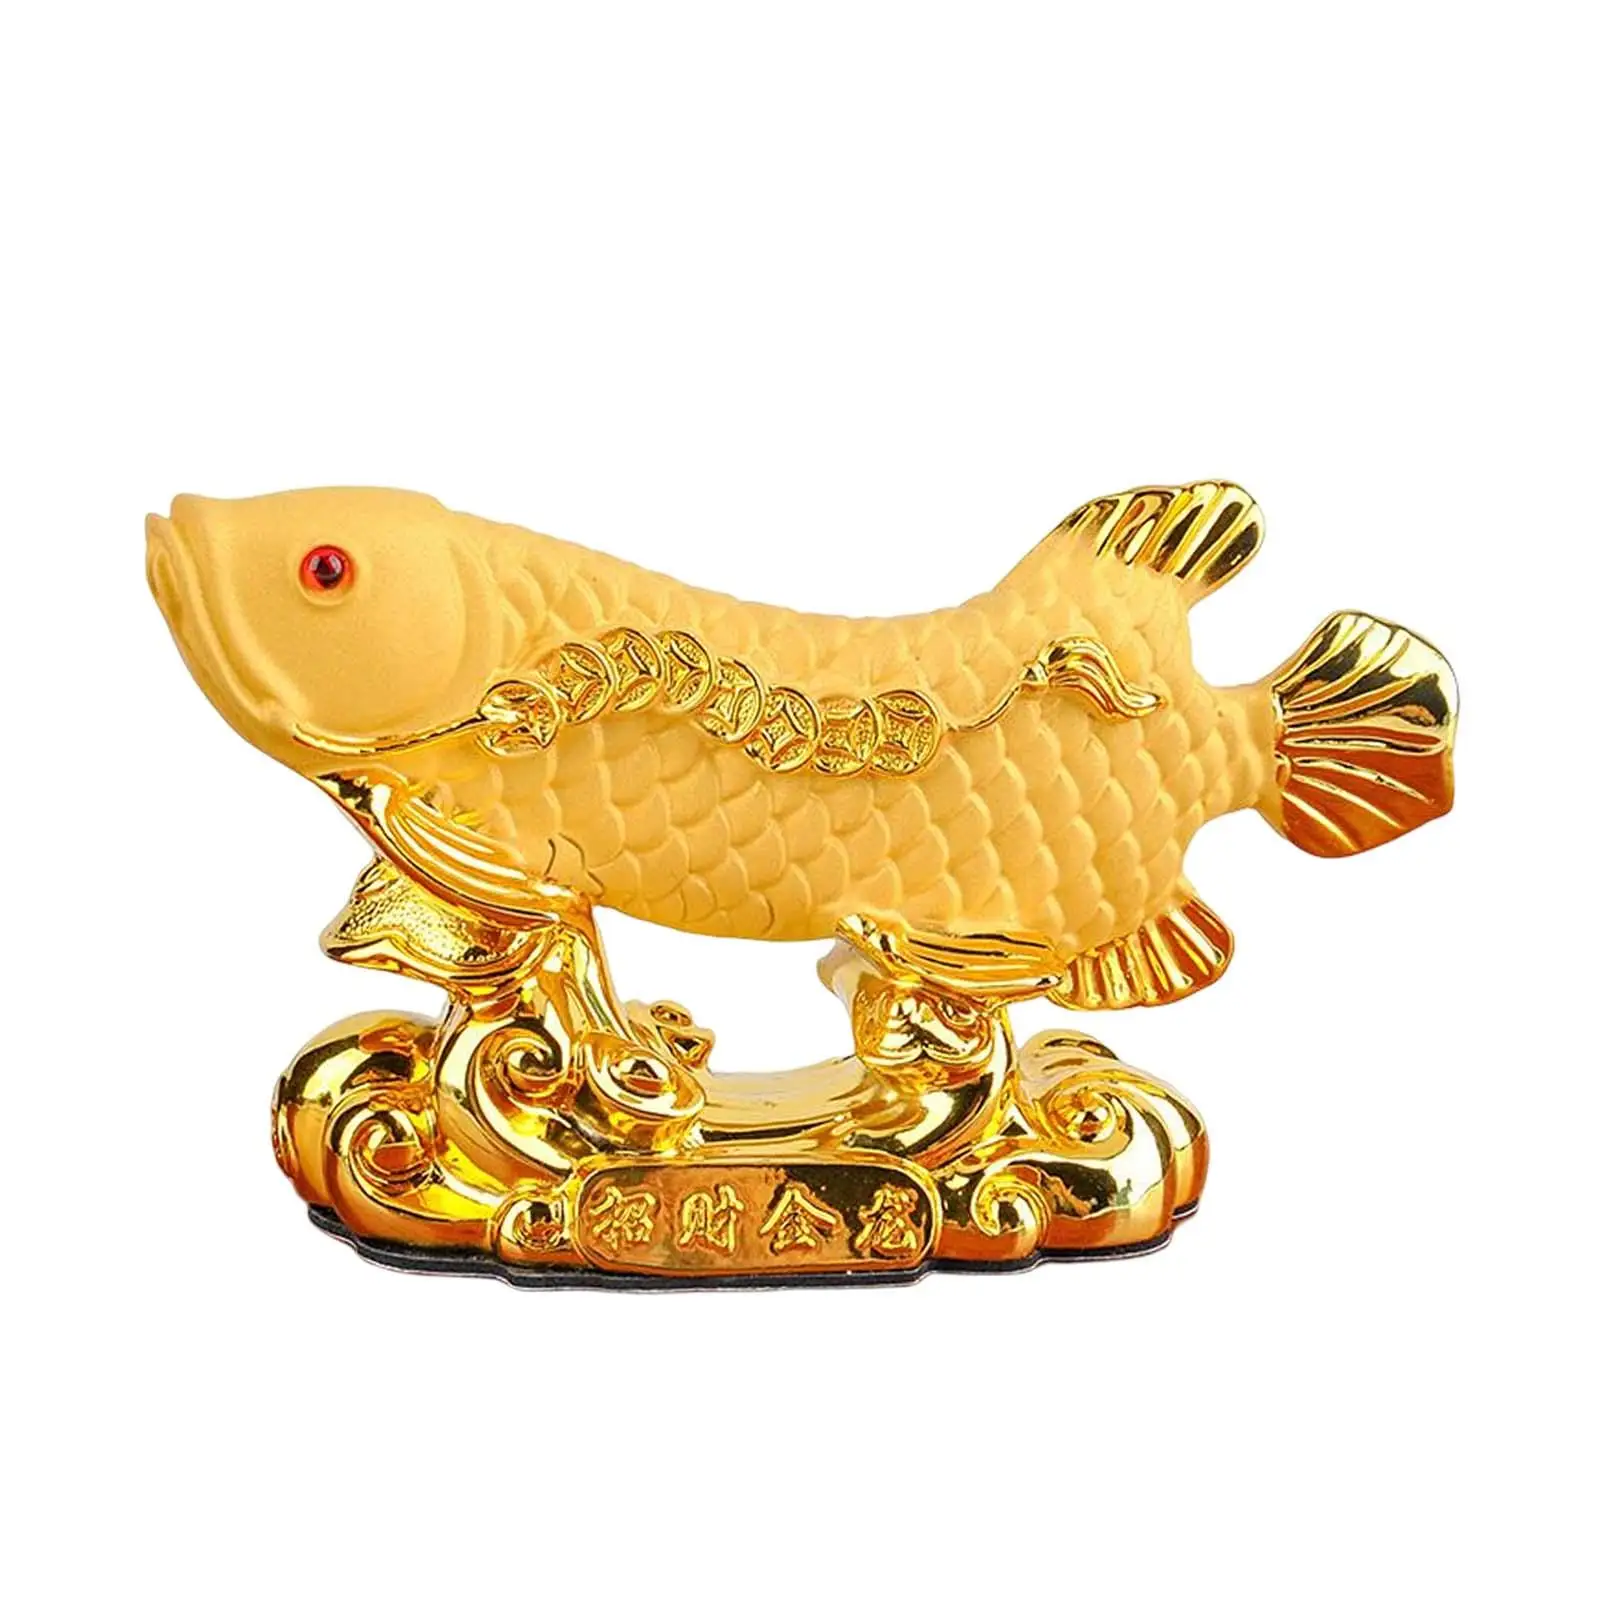 Resin Goldfish Figurines Treasure Sculptures Dining Room Decors Art Works Fengshui Fish Statues for Companies Hotel Housewarming